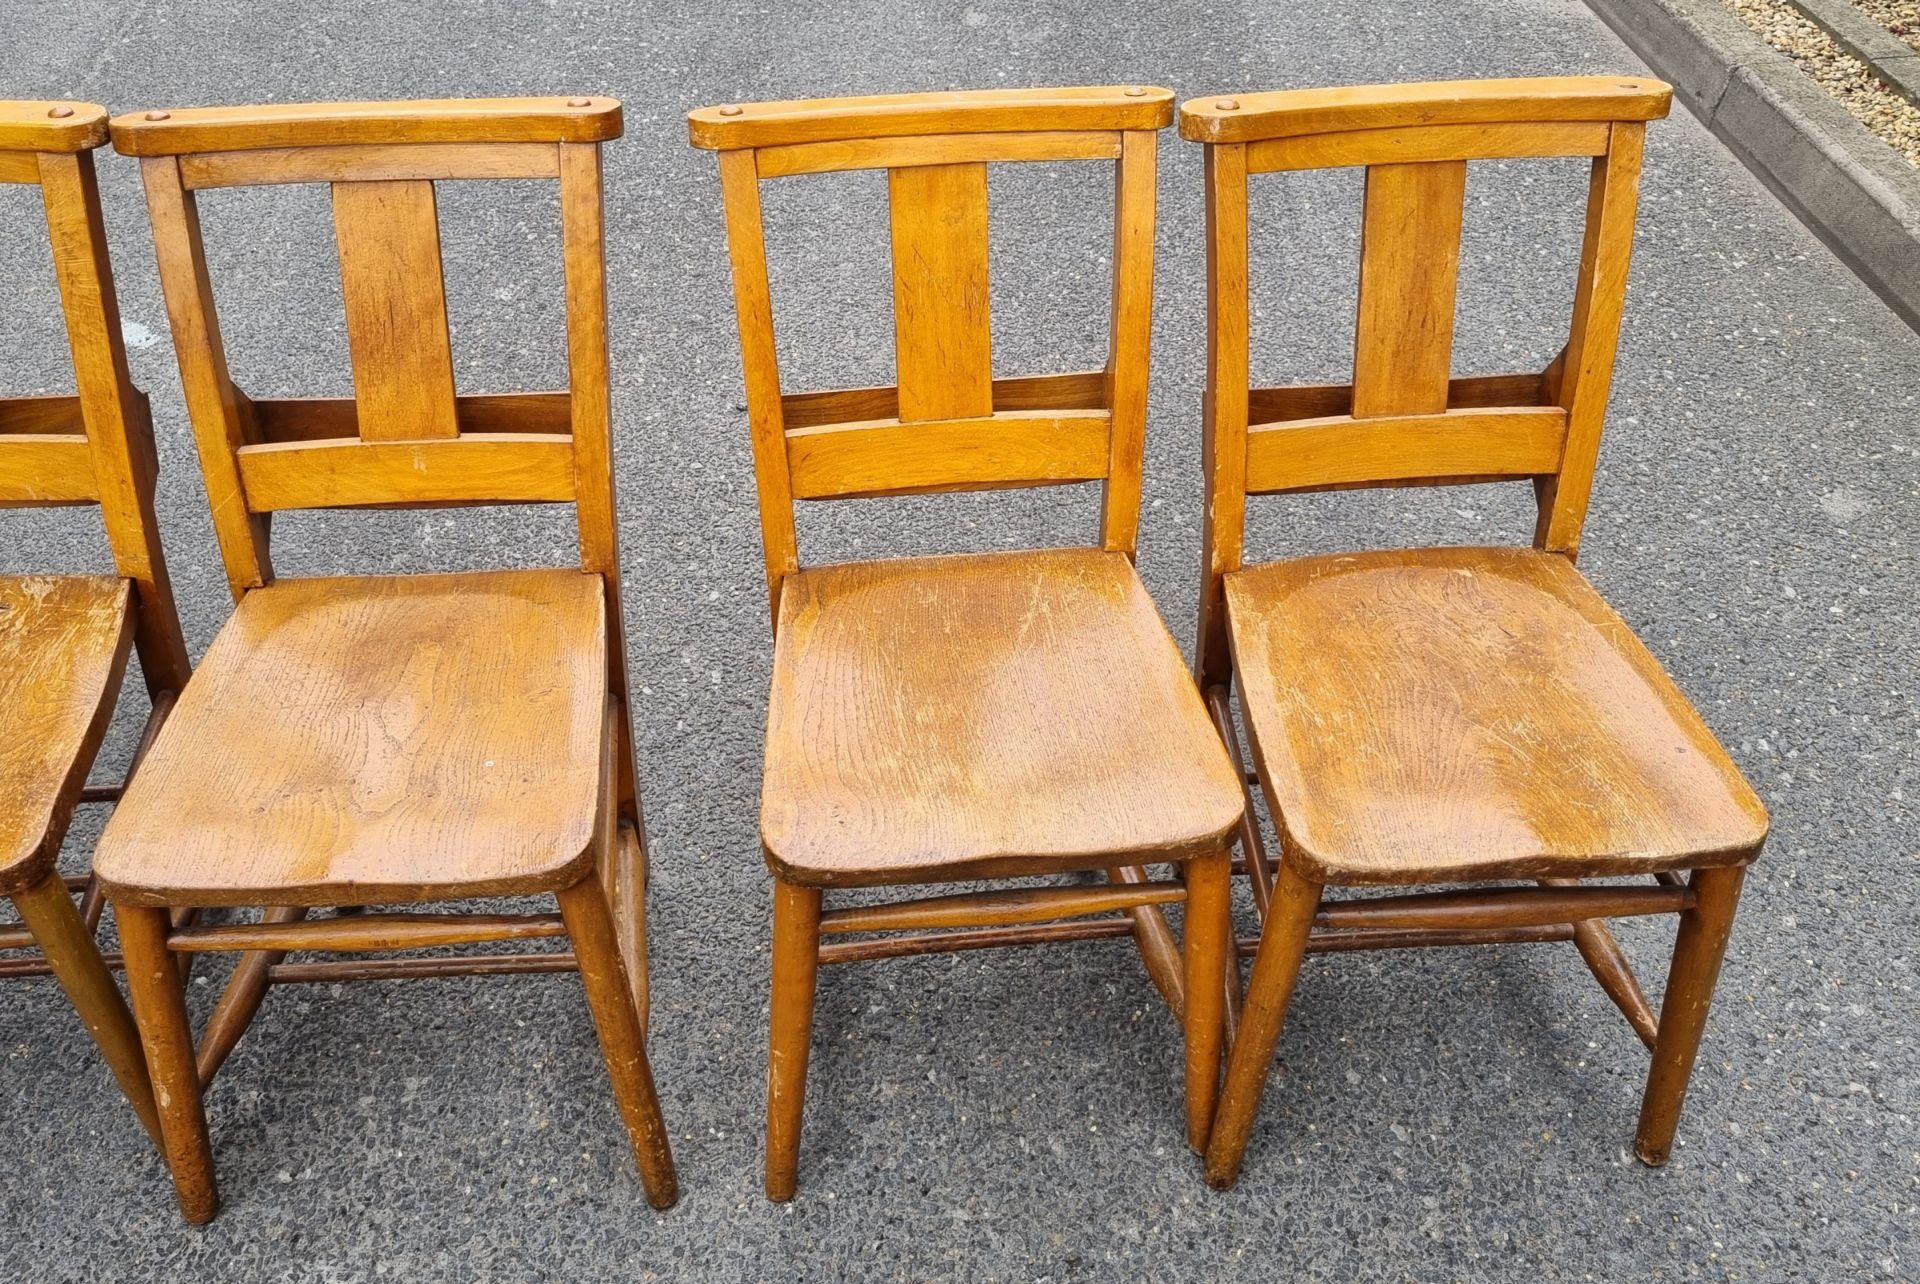 12x Wooden chairs with rear book holder - L 420 x W 420 x H 820mm - Image 9 of 10